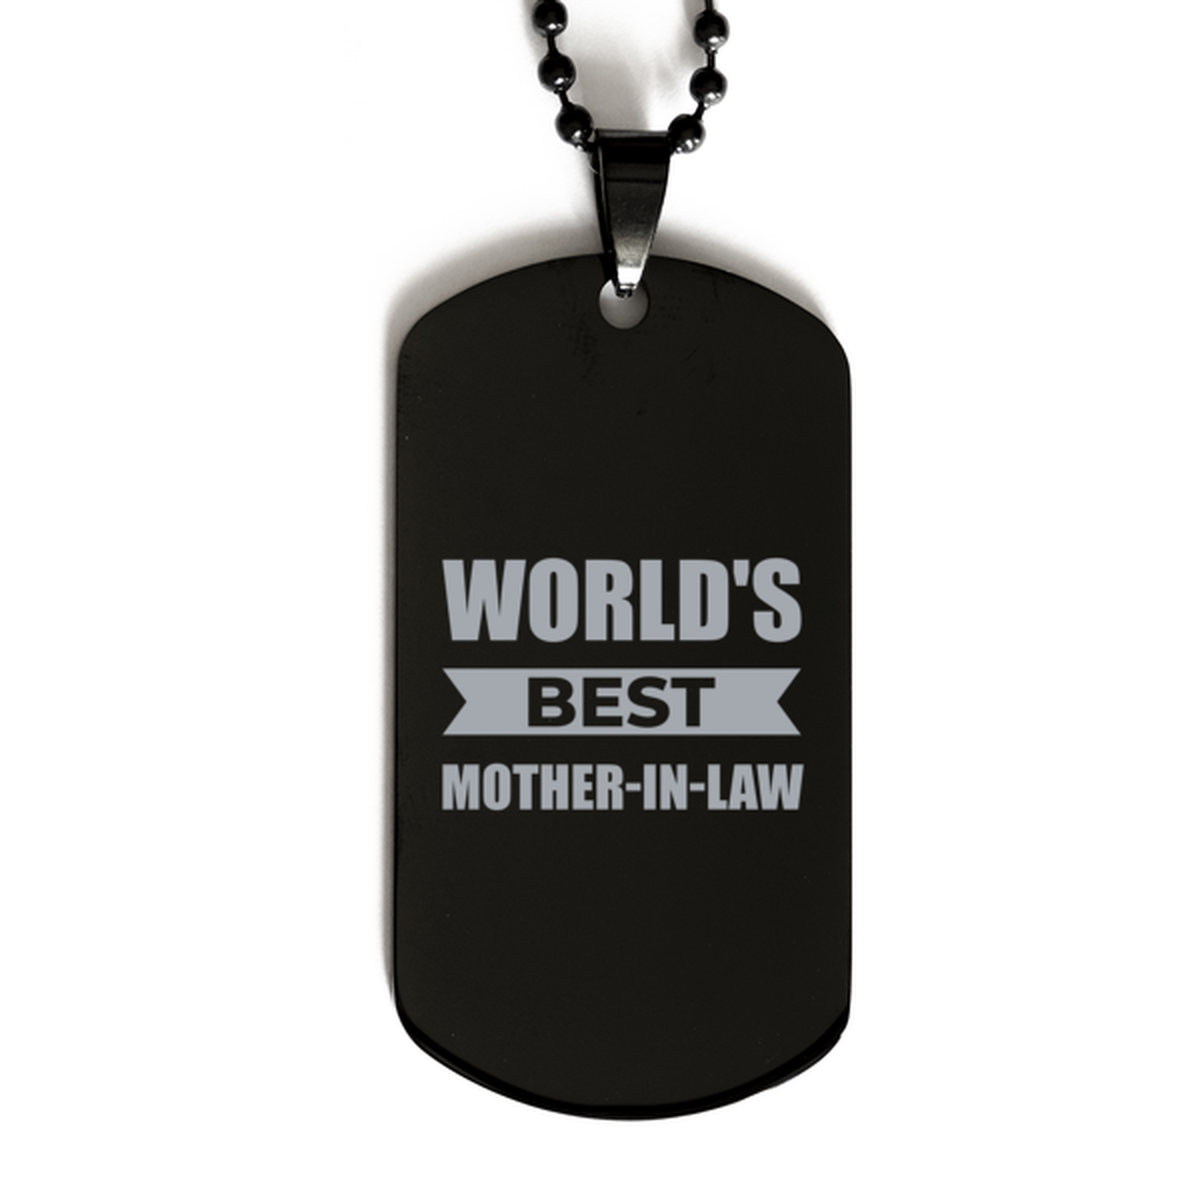 Worlds Best Mother-in-law Gifts, Funny Black Engraved Dog Tag For Mother-in-law, Birthday Presents For Women